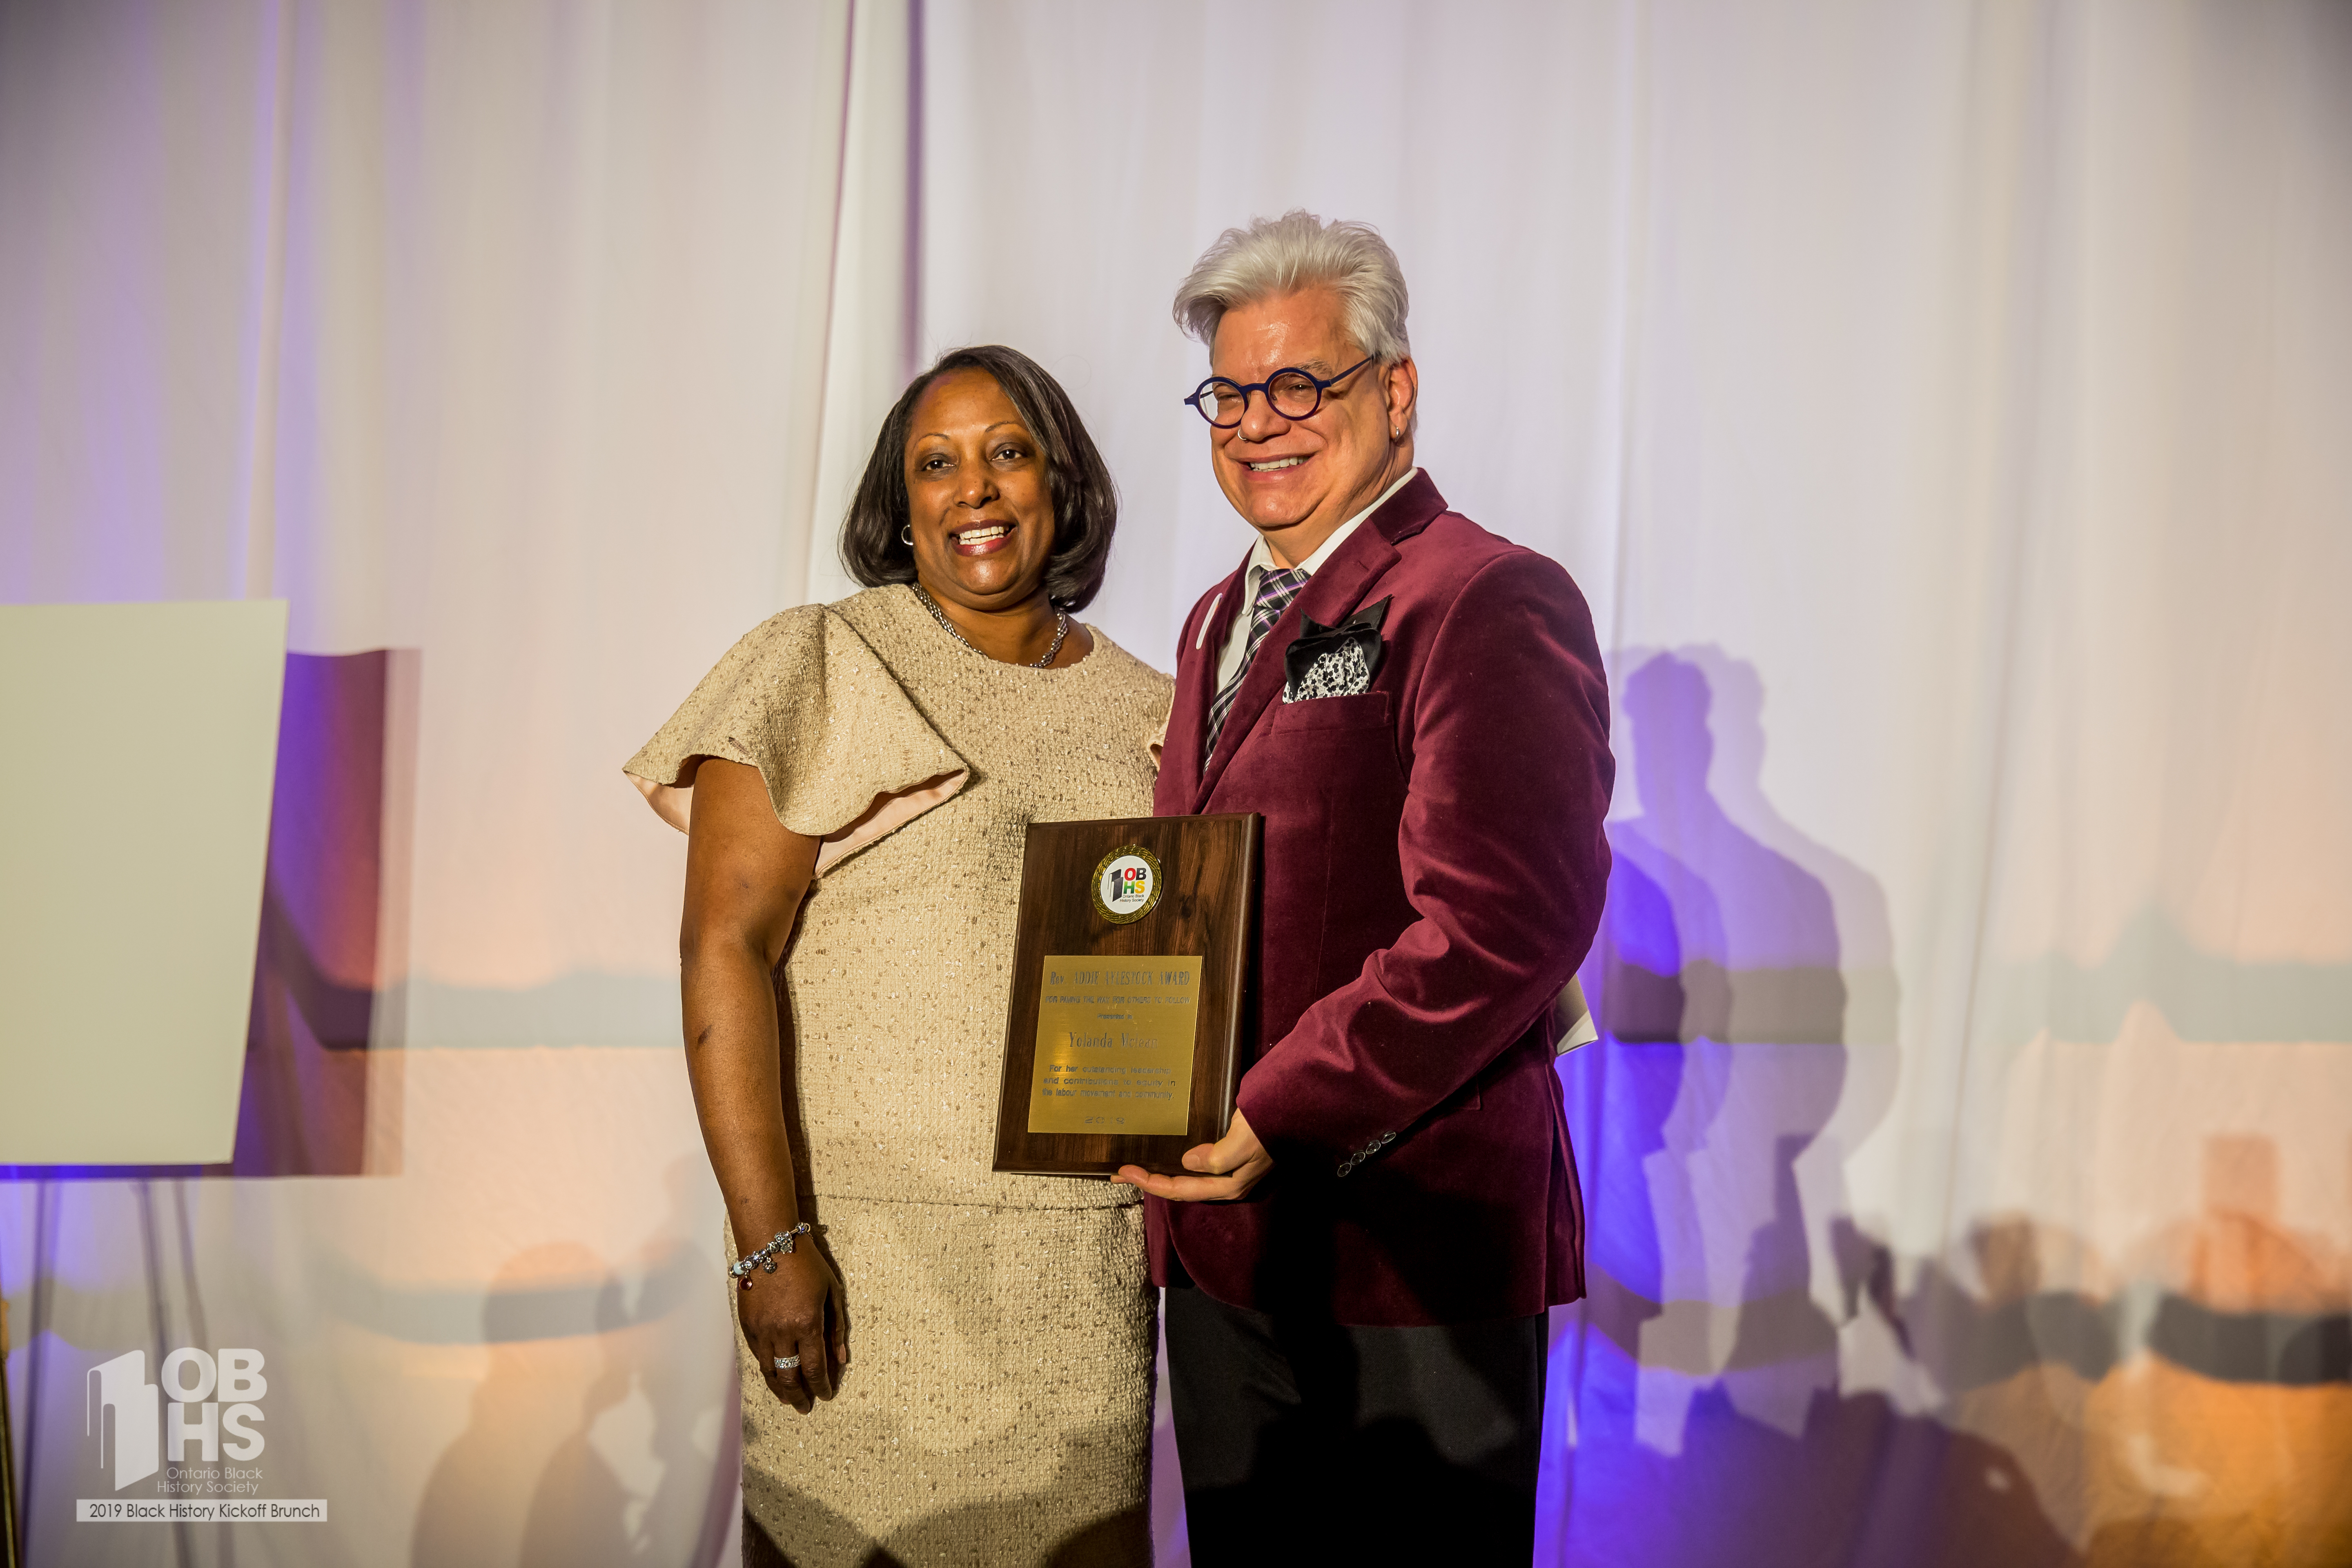 CUPE ON Fred Hahn presents an award to Yolanda McLean - photo by www.sayhilondon.com